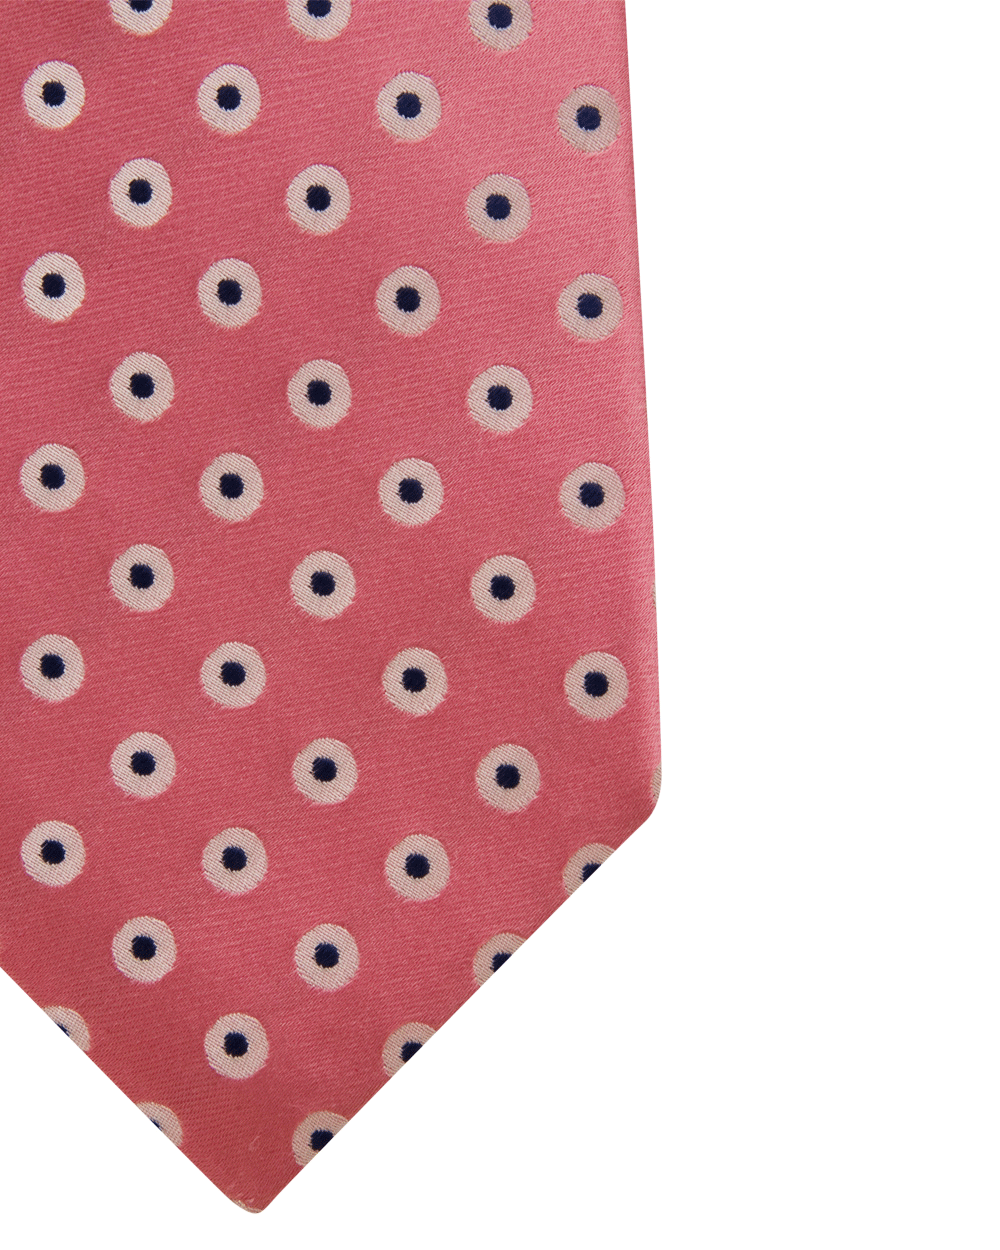 Faded Red and Silver Dotted Tie